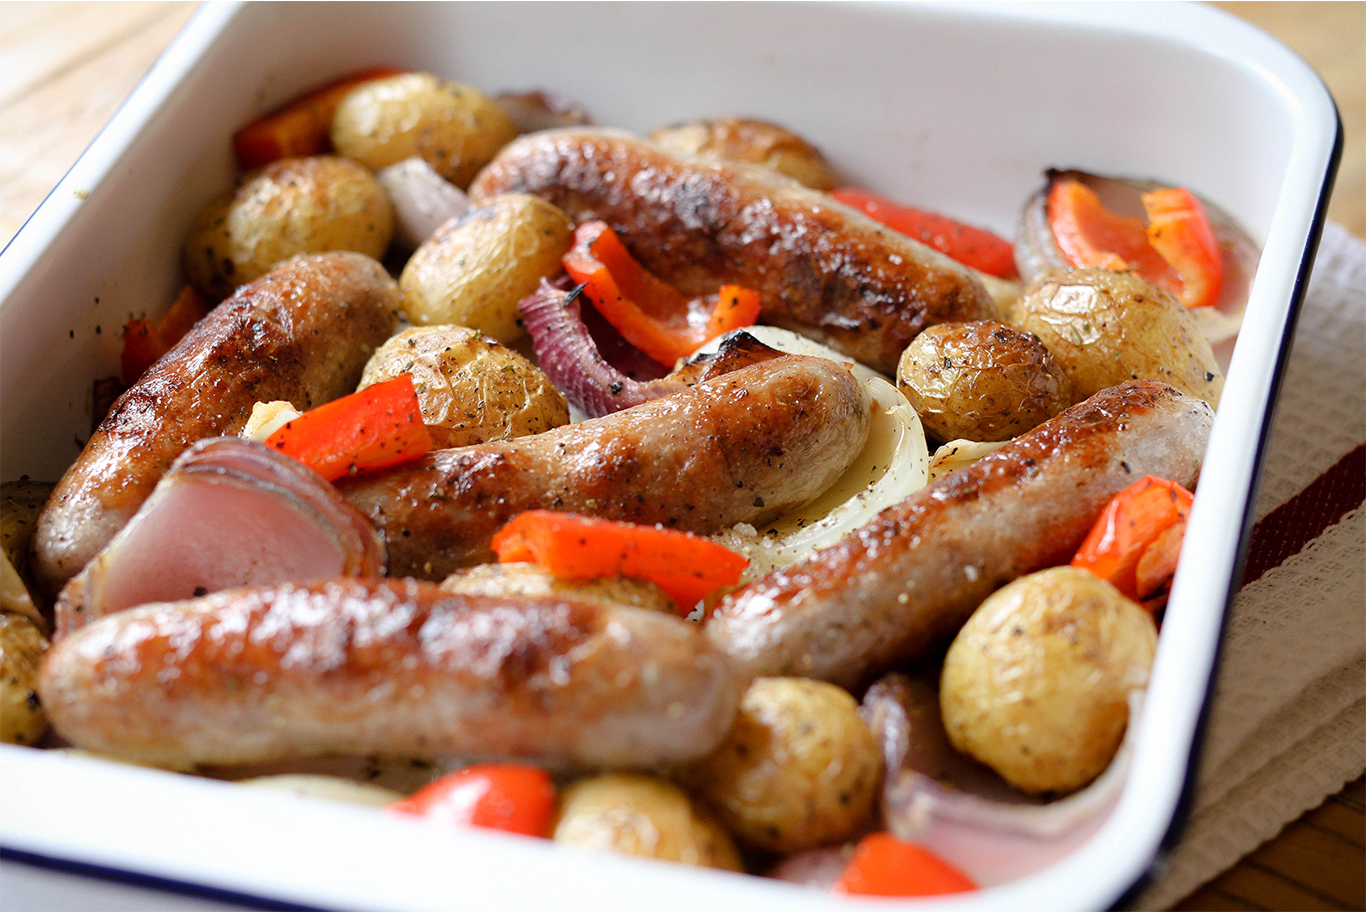 An enamel tray filled with oven cooked sausages, new potatoes, red peppers and onions